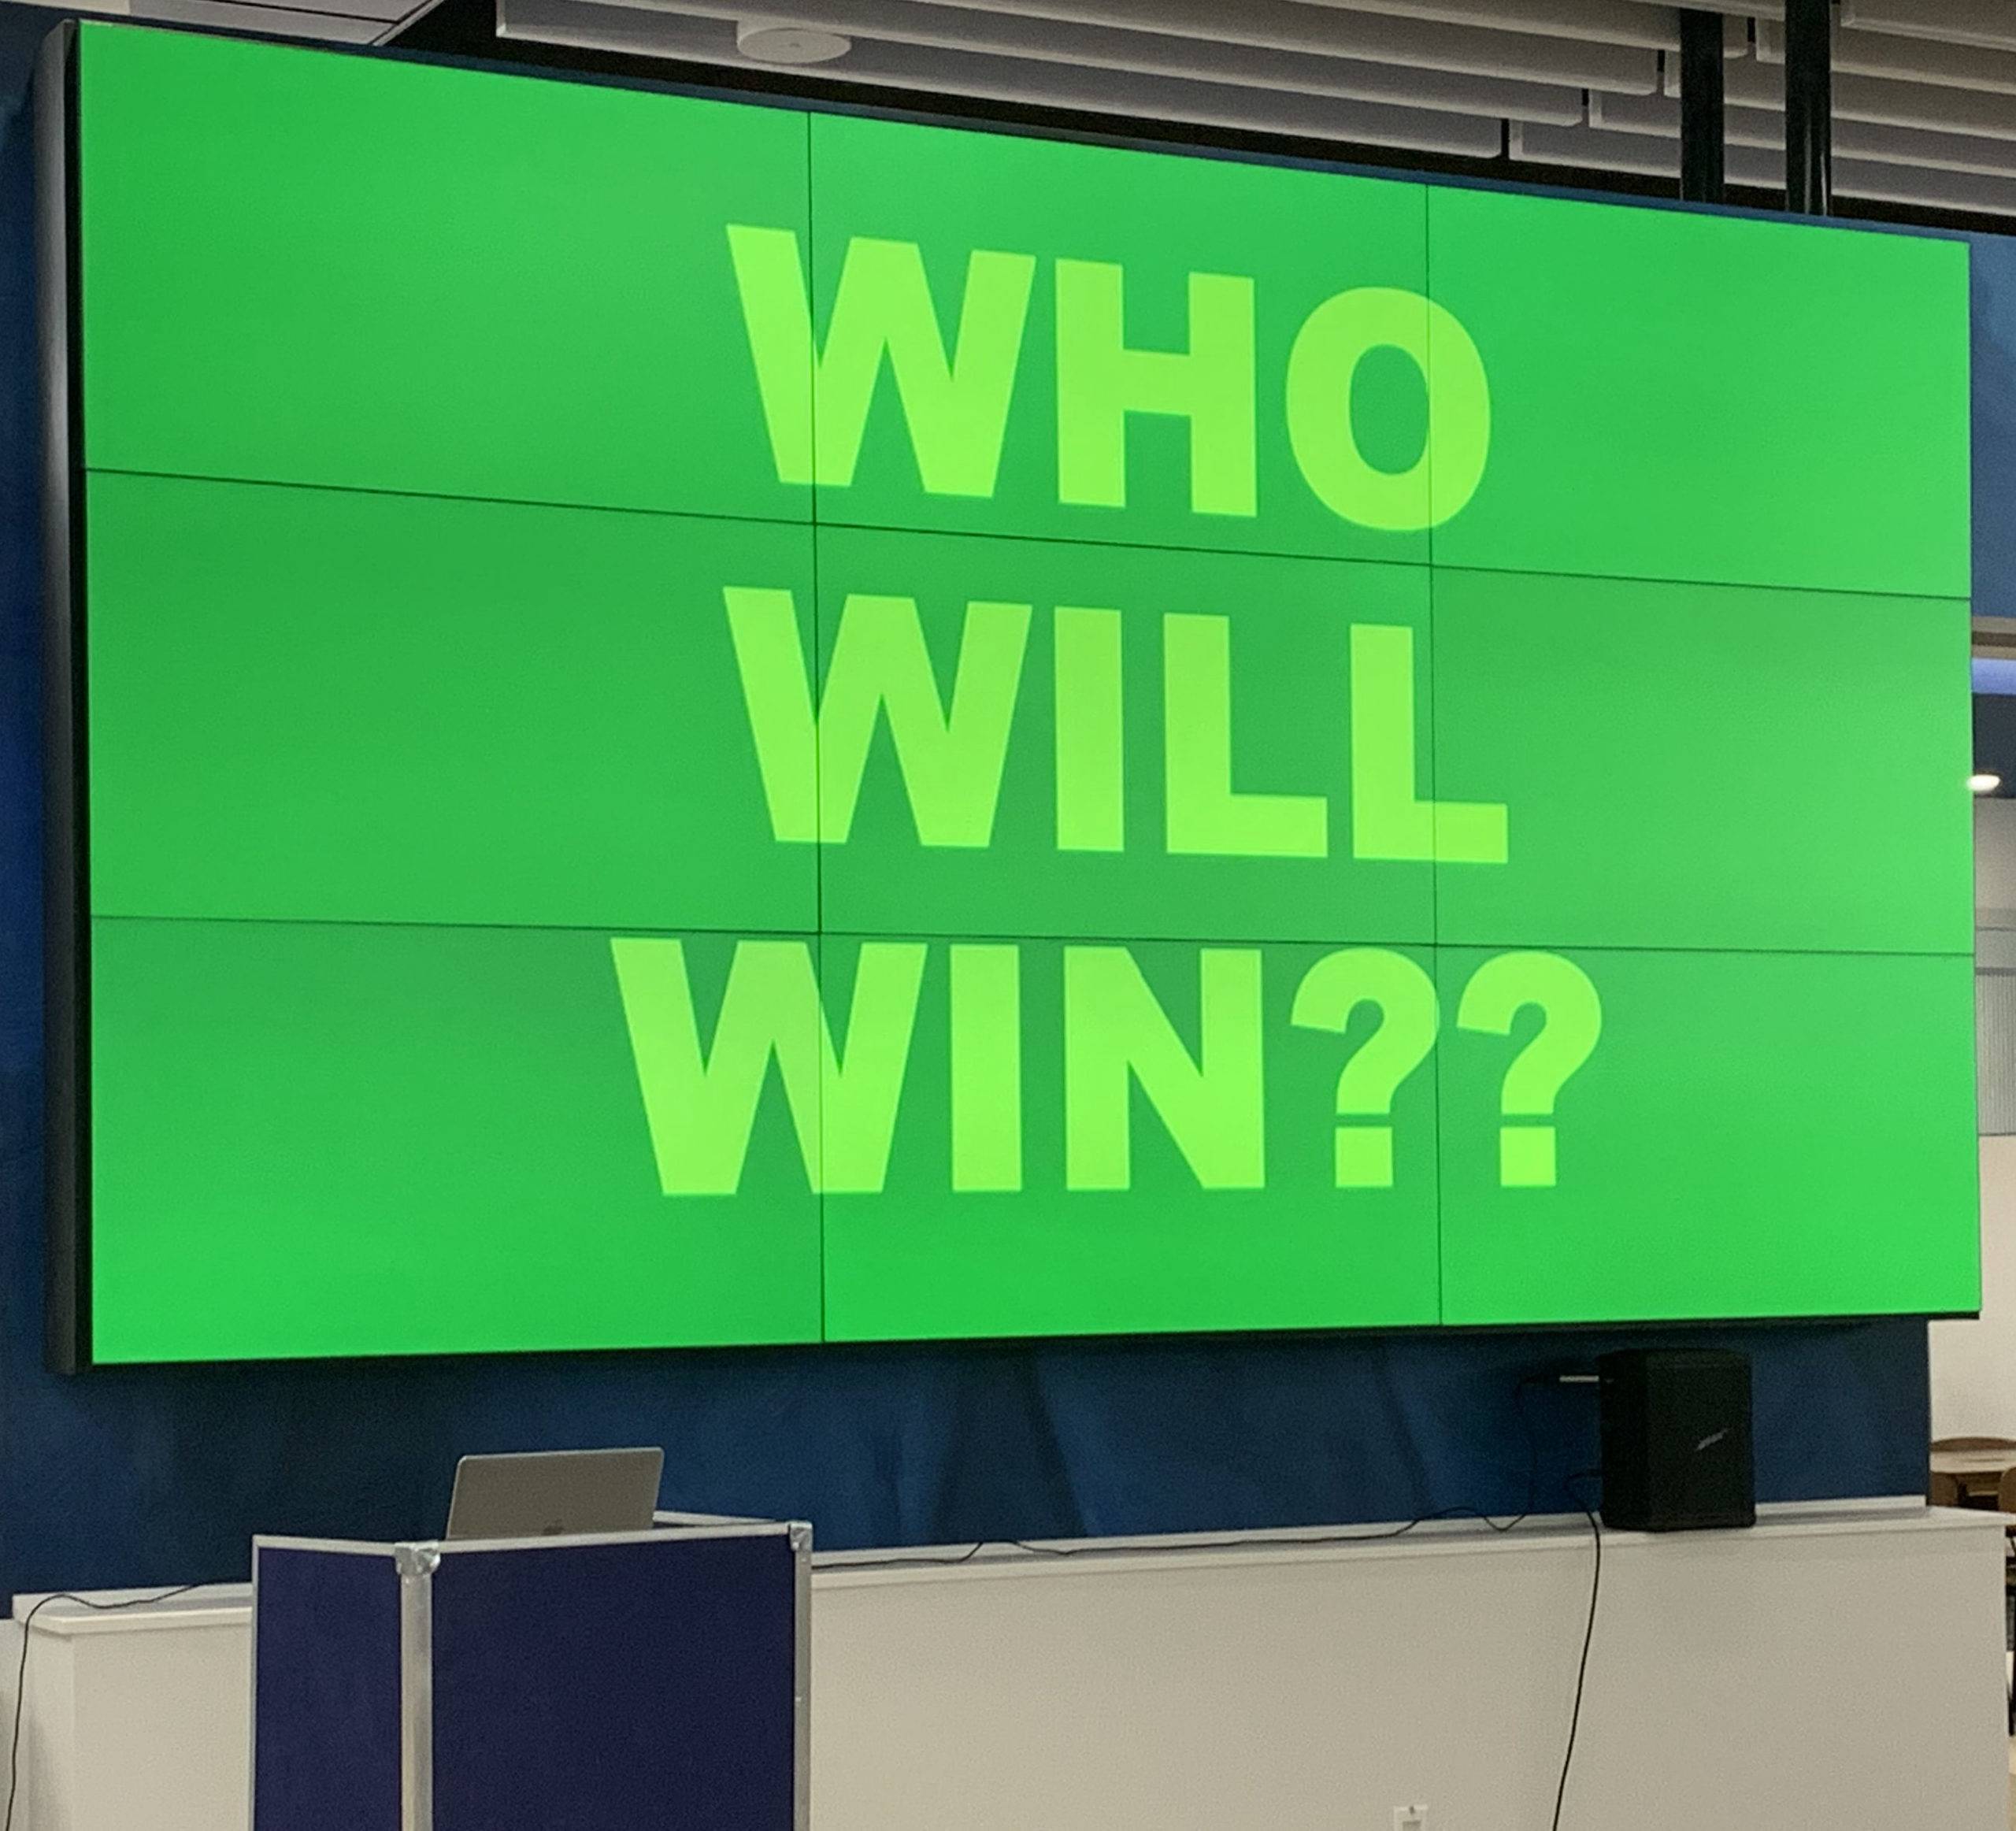 "Who will win" reads the large, green LED game show sign